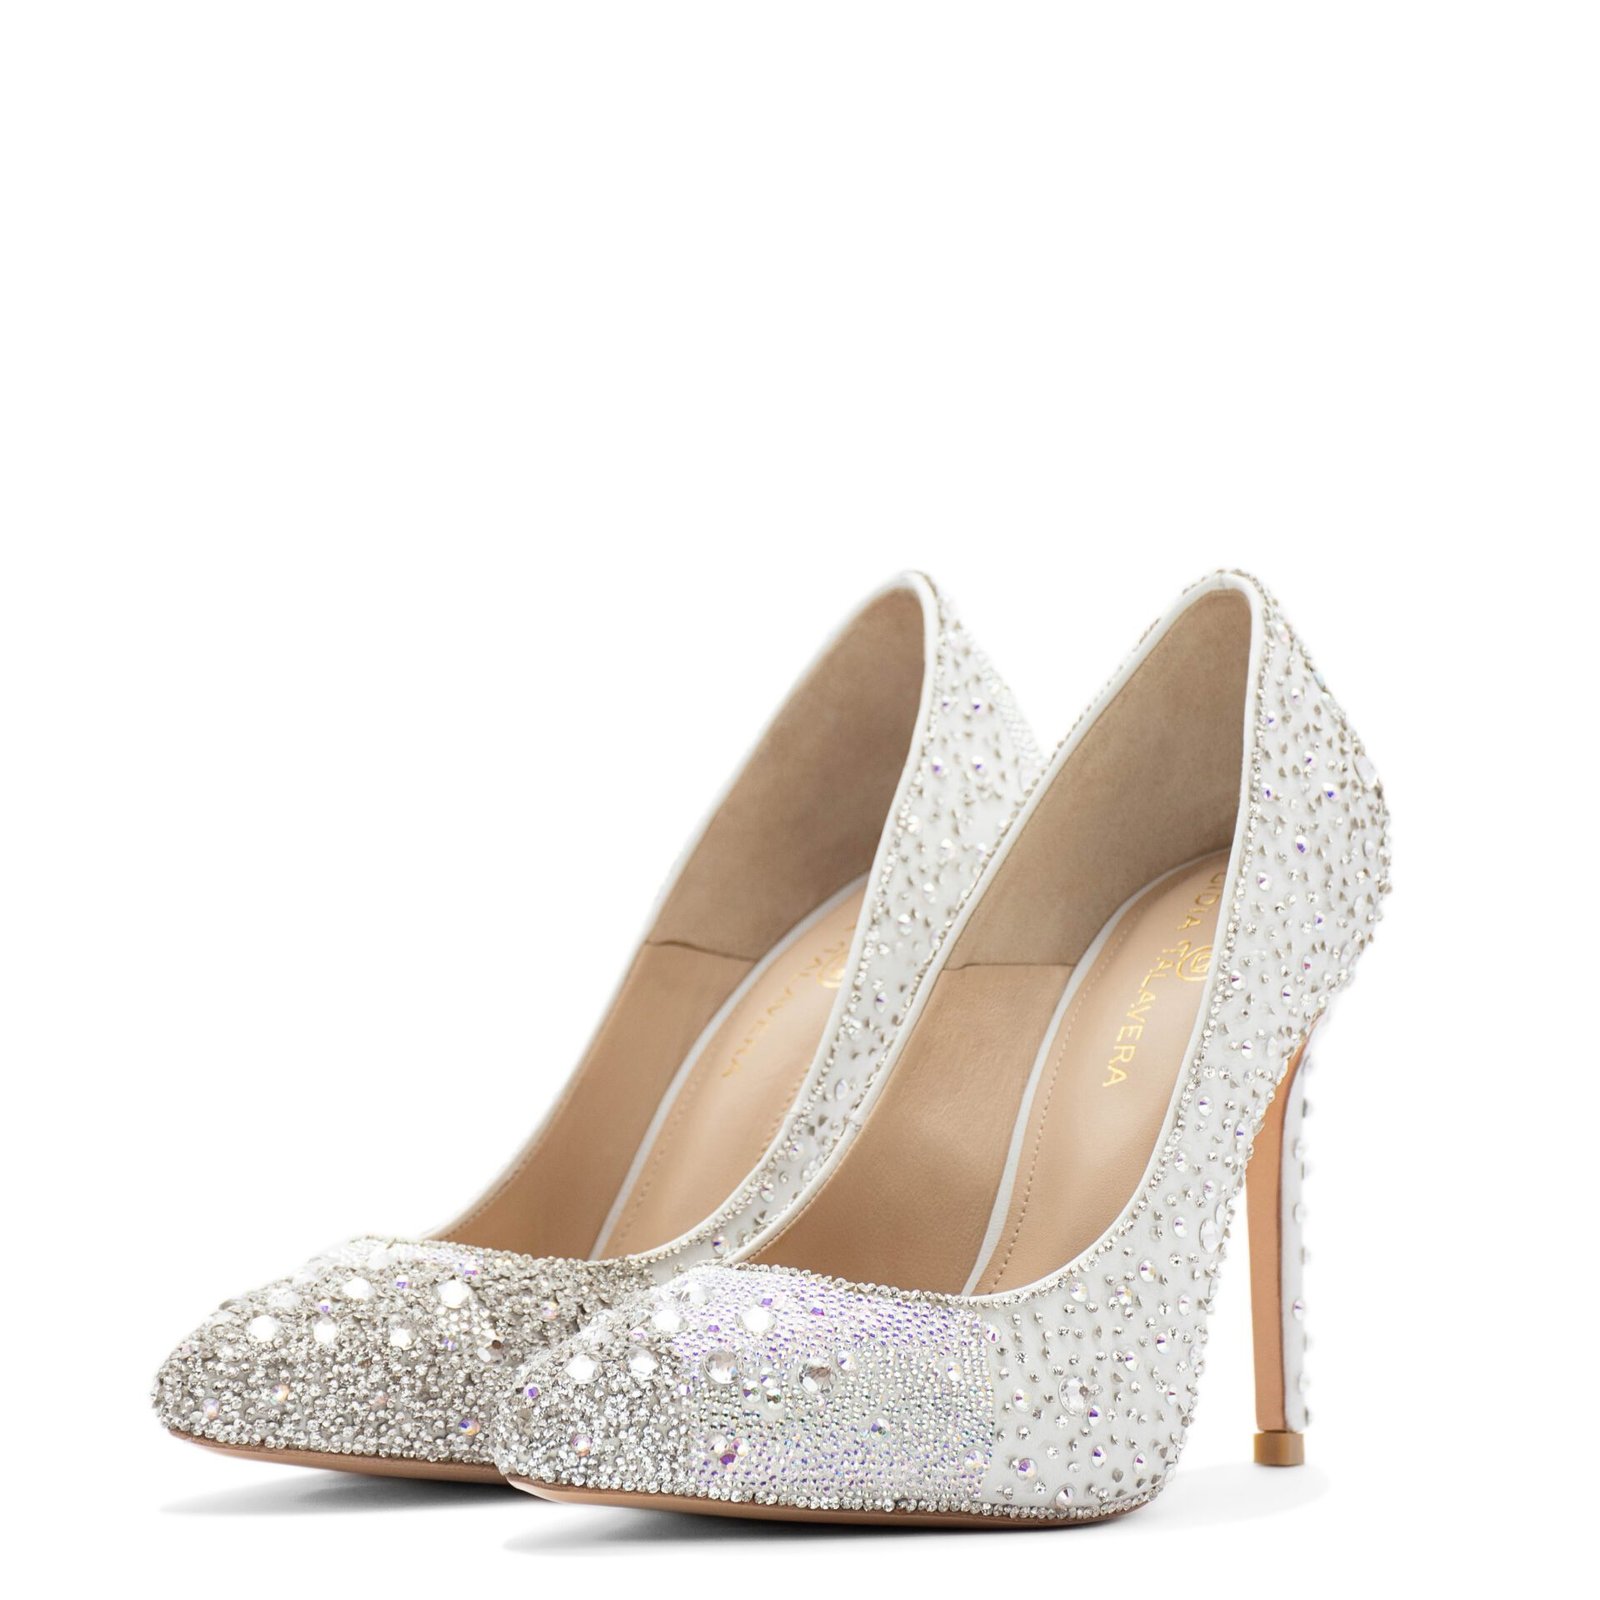 Bride pointed toe shoes with crystals